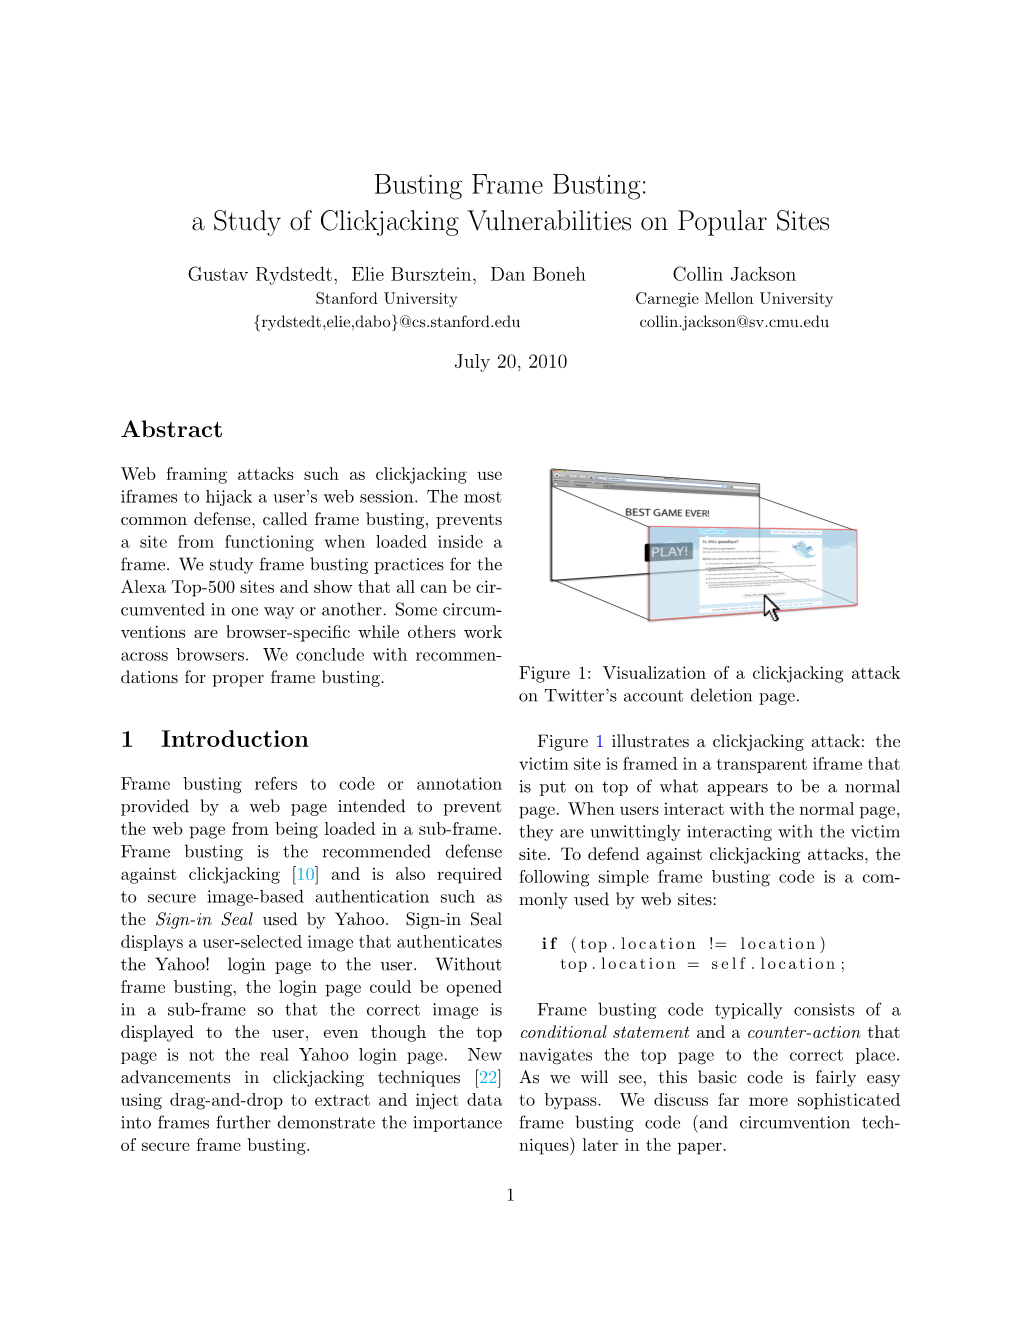 Busting Frame Busting: a Study of Clickjacking Vulnerabilities on Popular Sites